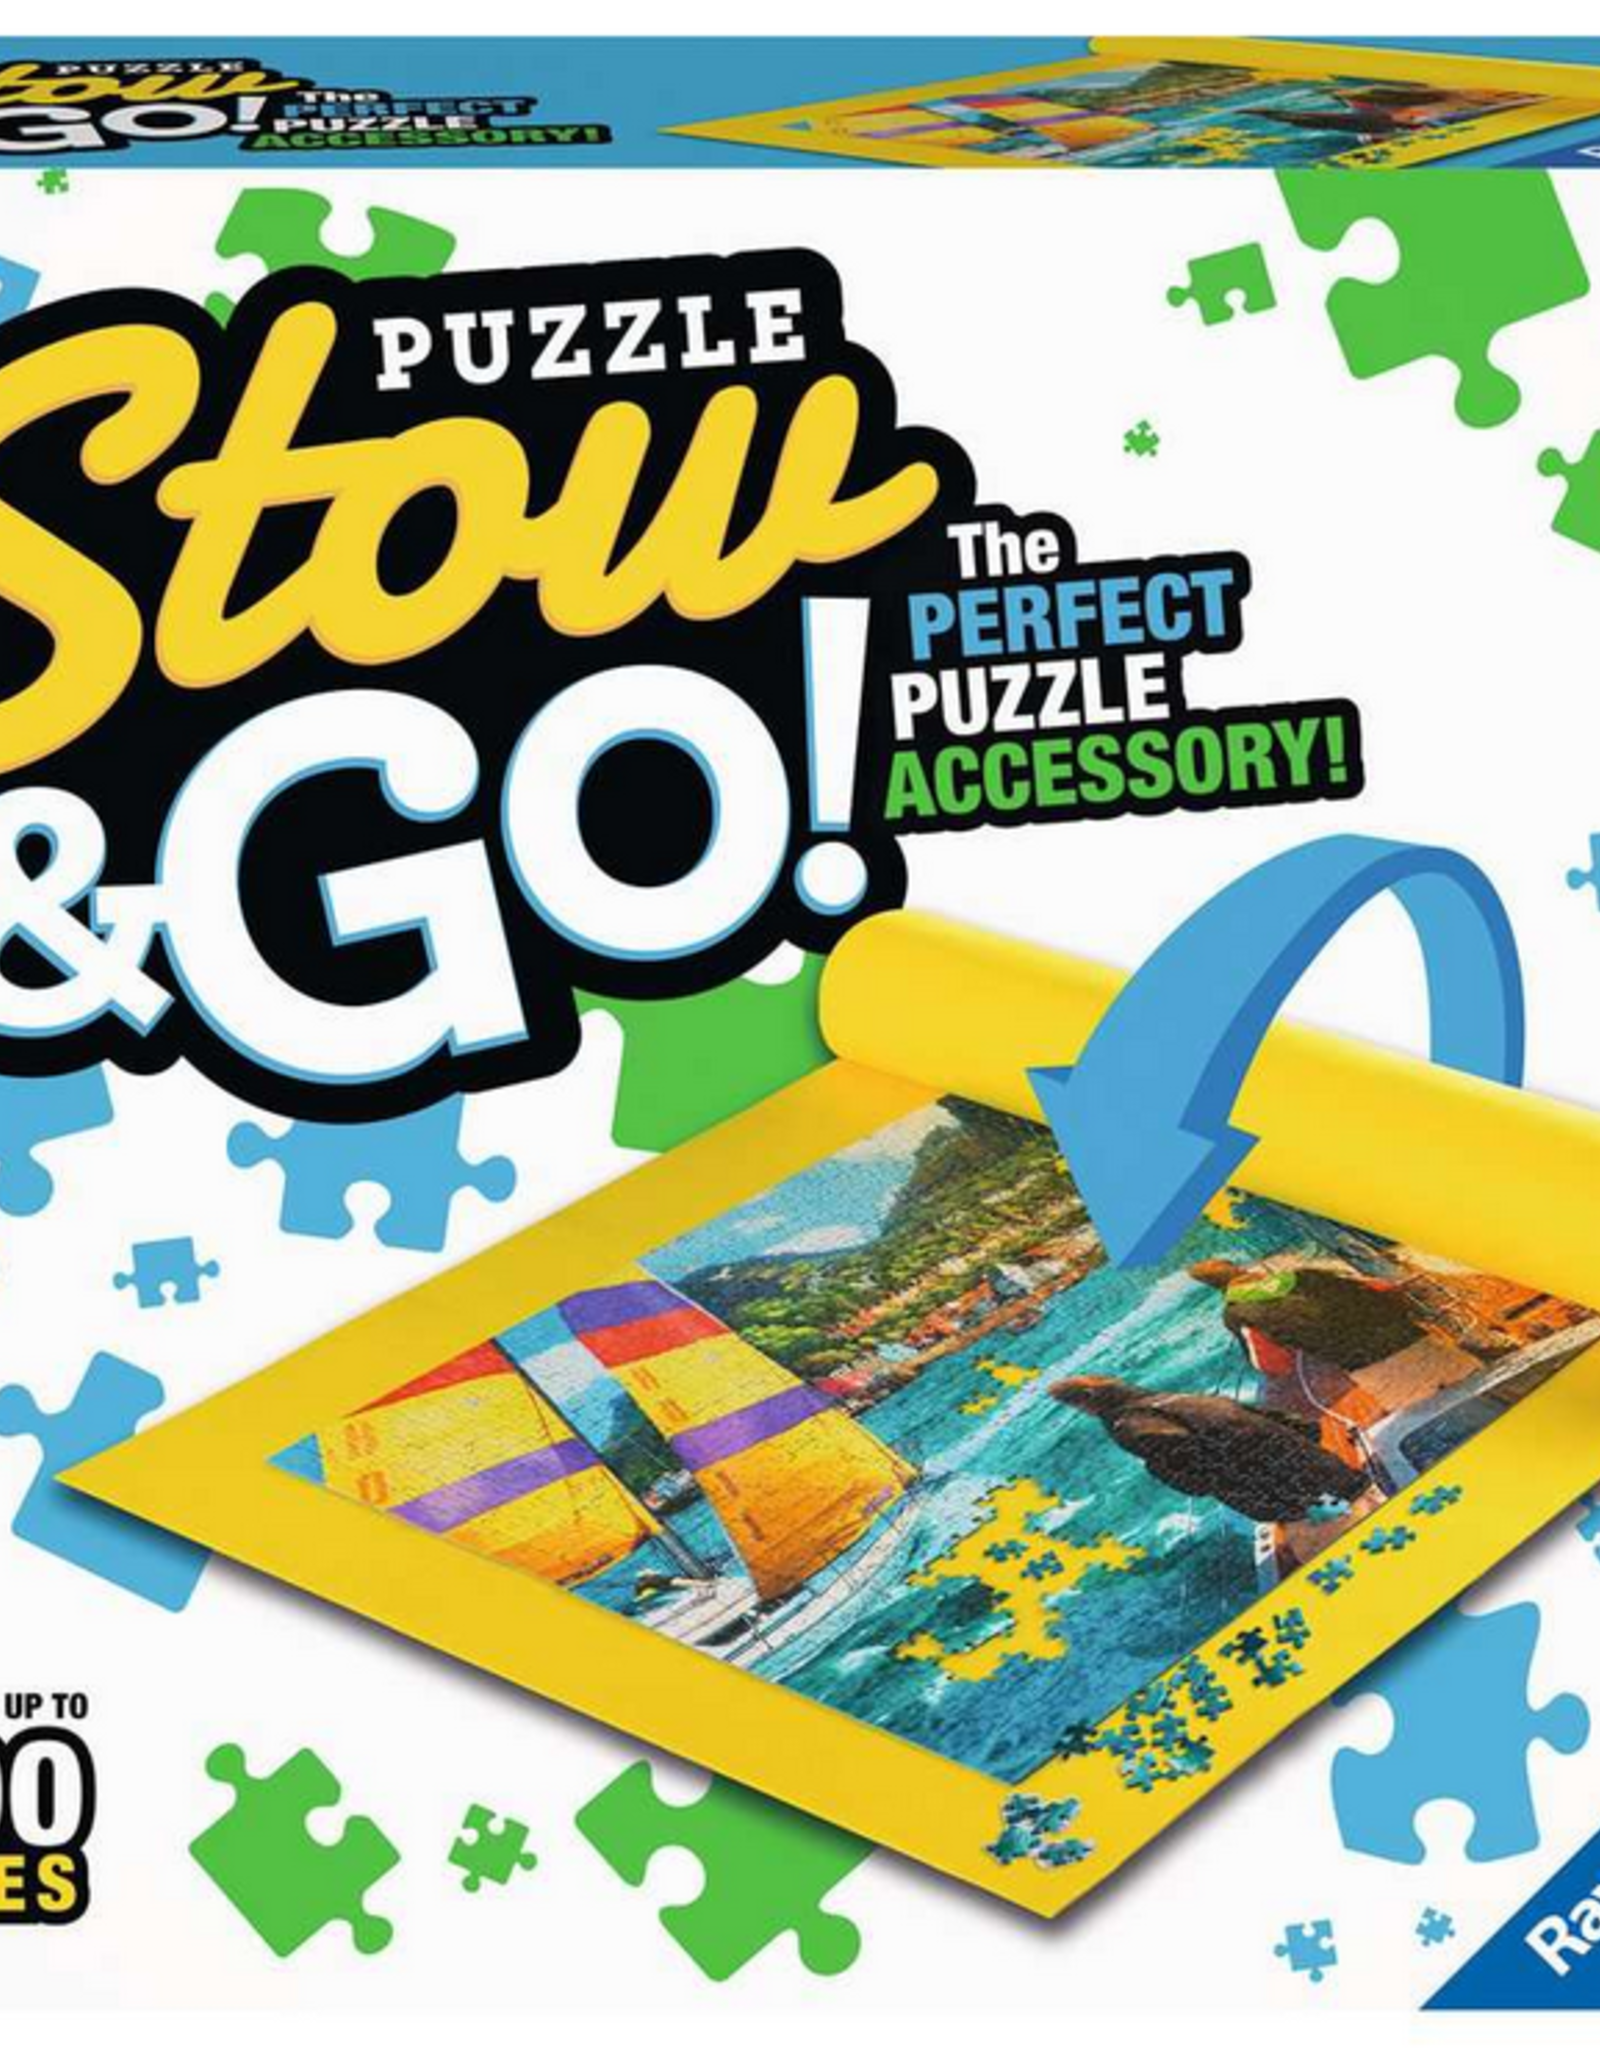 Ravensburger Puzzle Stow & Go! Accessory